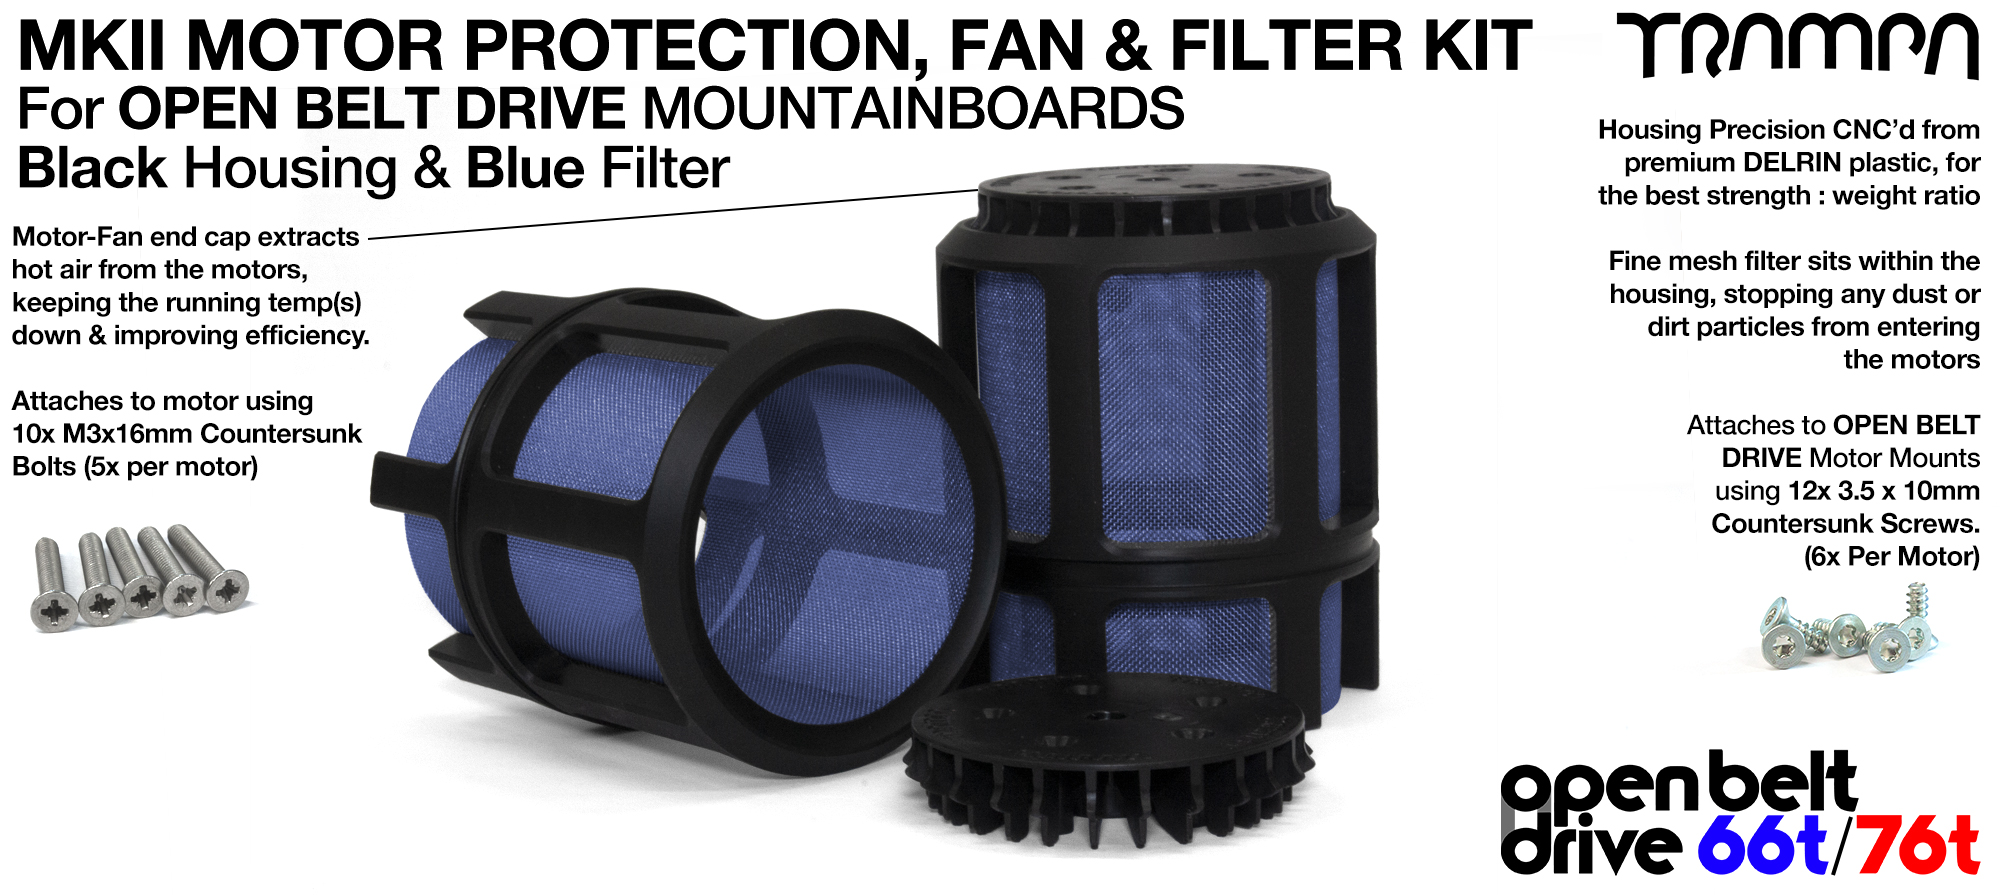 FULL CAGE Motor protection SUPER STRONG DELRIN Plastic includes Fan & BLUE Filter - TWIN